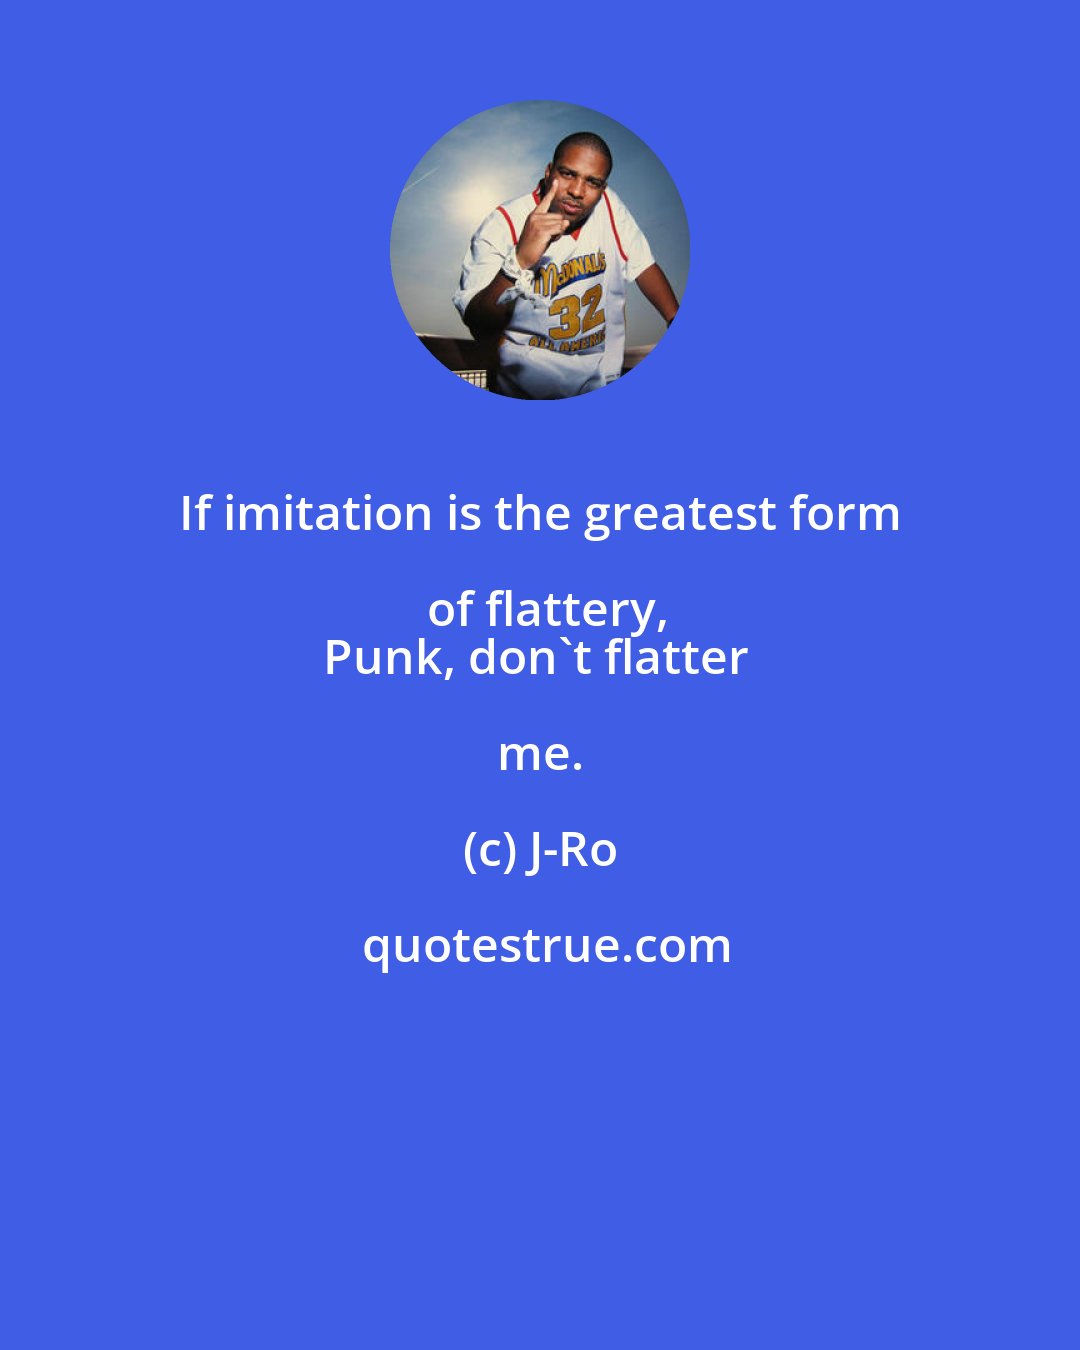 J-Ro: If imitation is the greatest form of flattery,
Punk, don't flatter me.